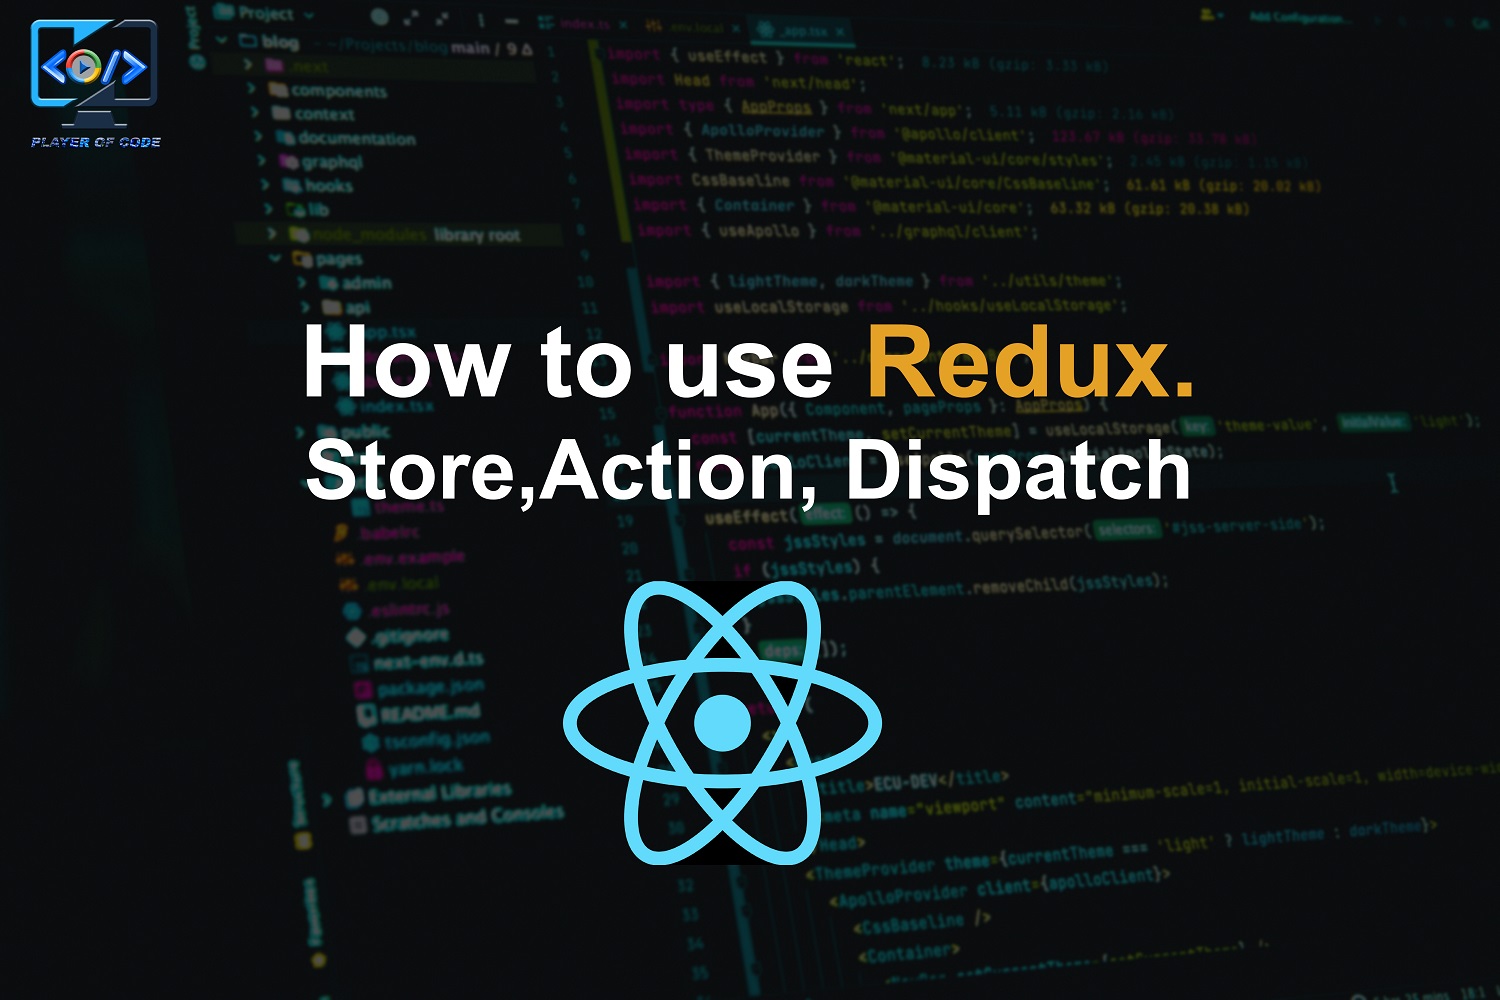 How to use React Redux?